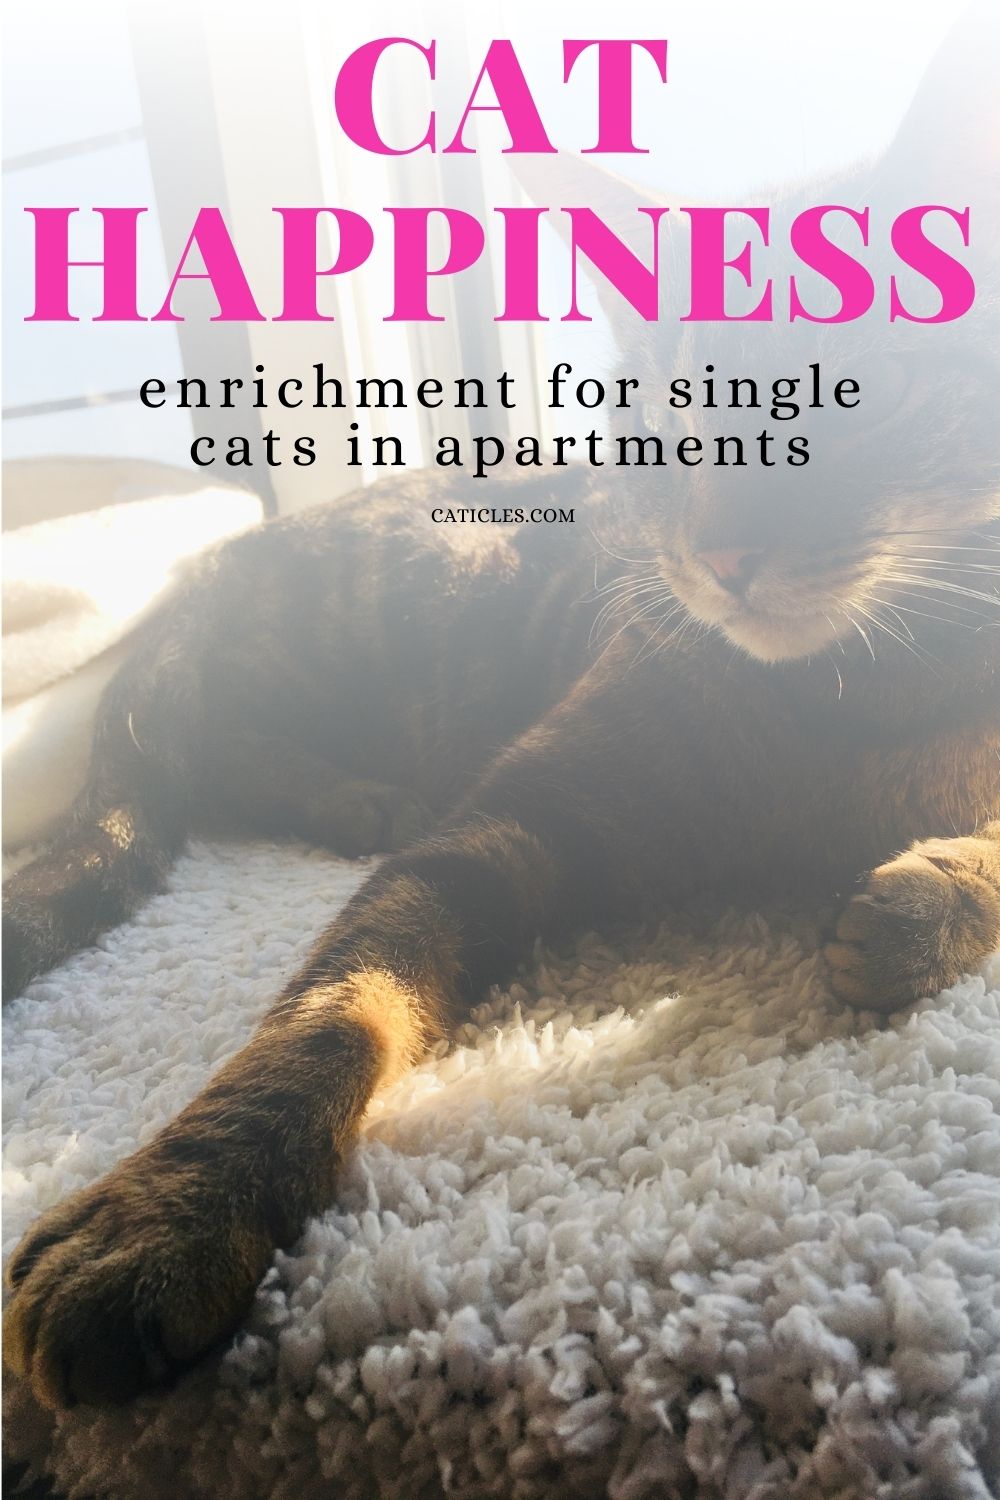 cat happiness enrichment for single cats pin image